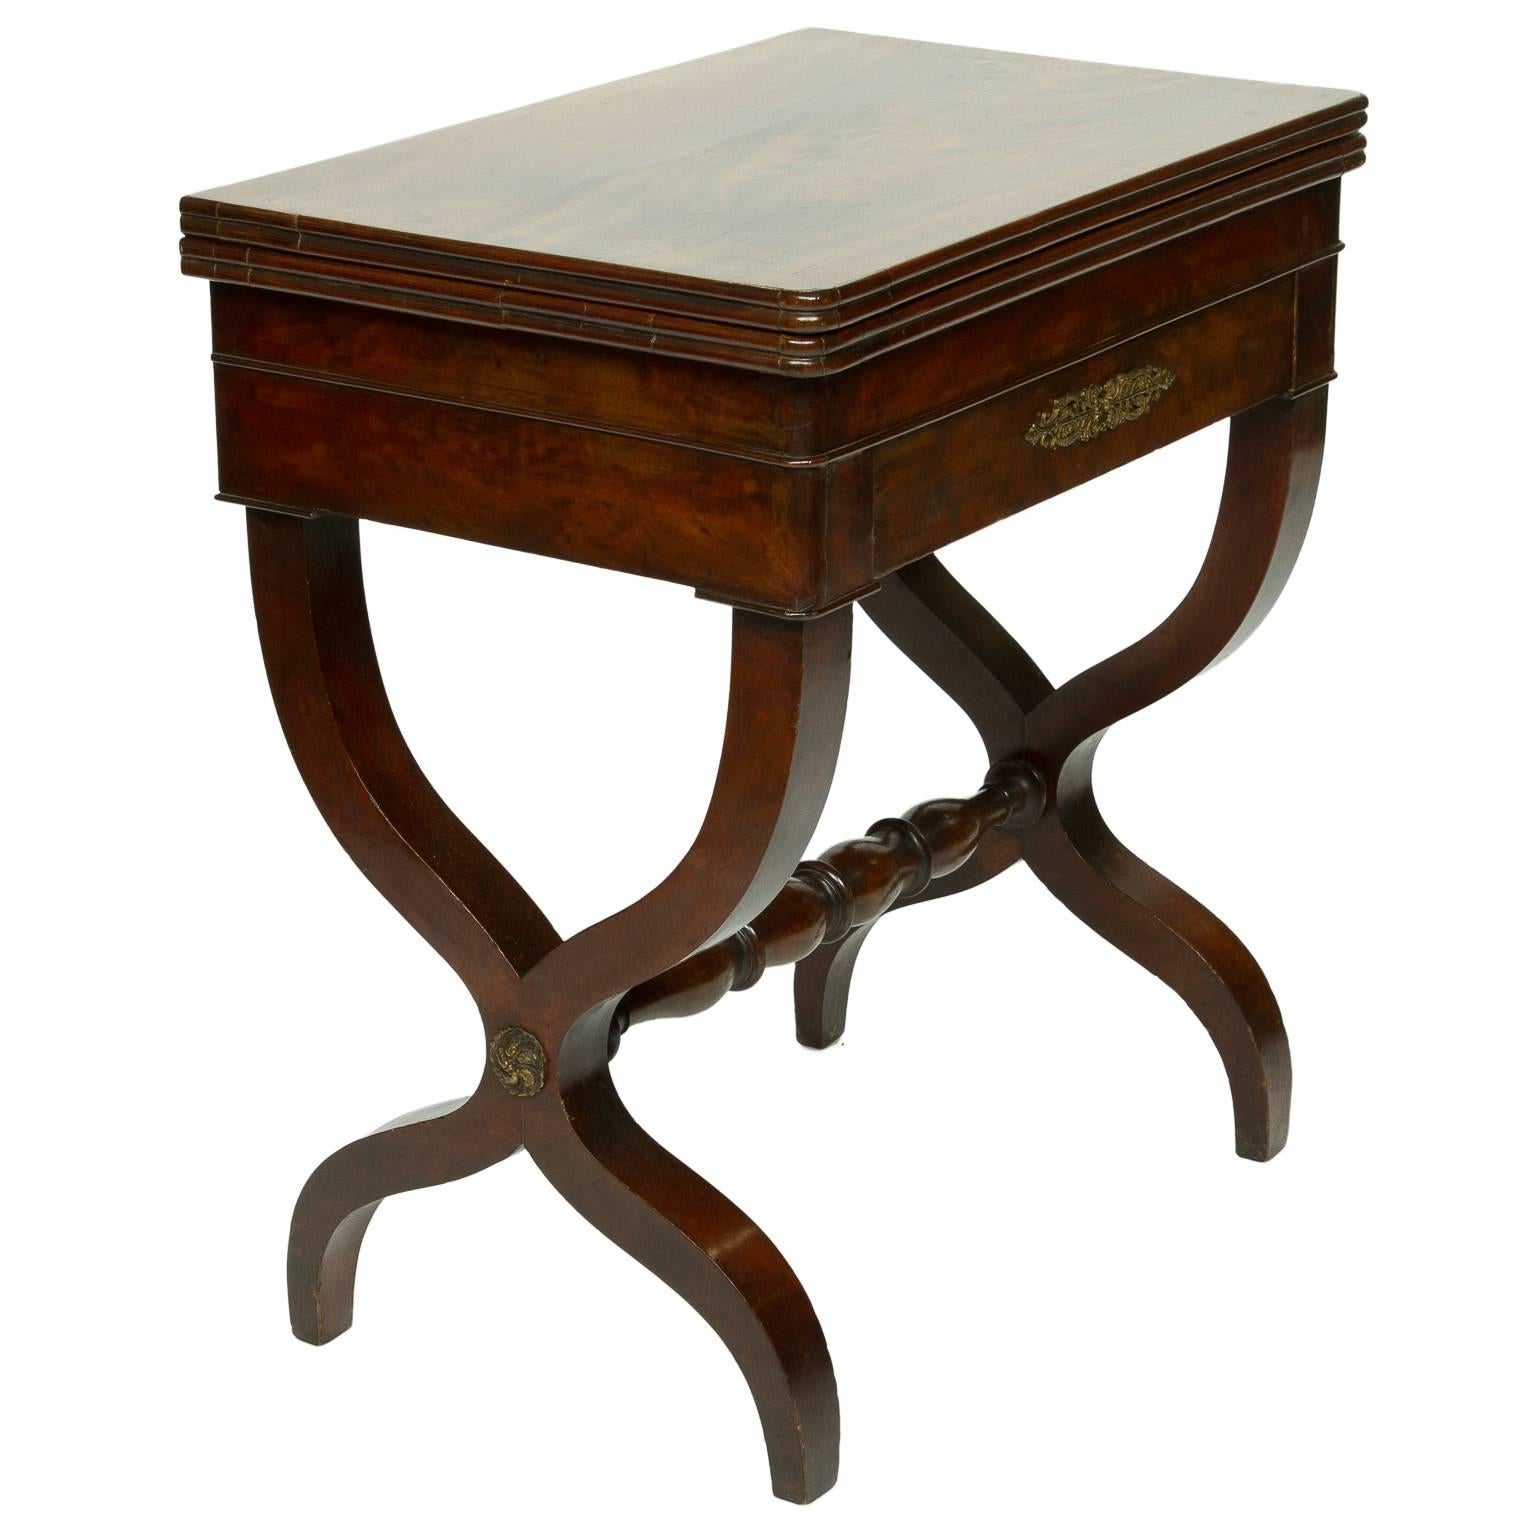 Early 19th Century 19th Century Foldover Empire Side Card Table